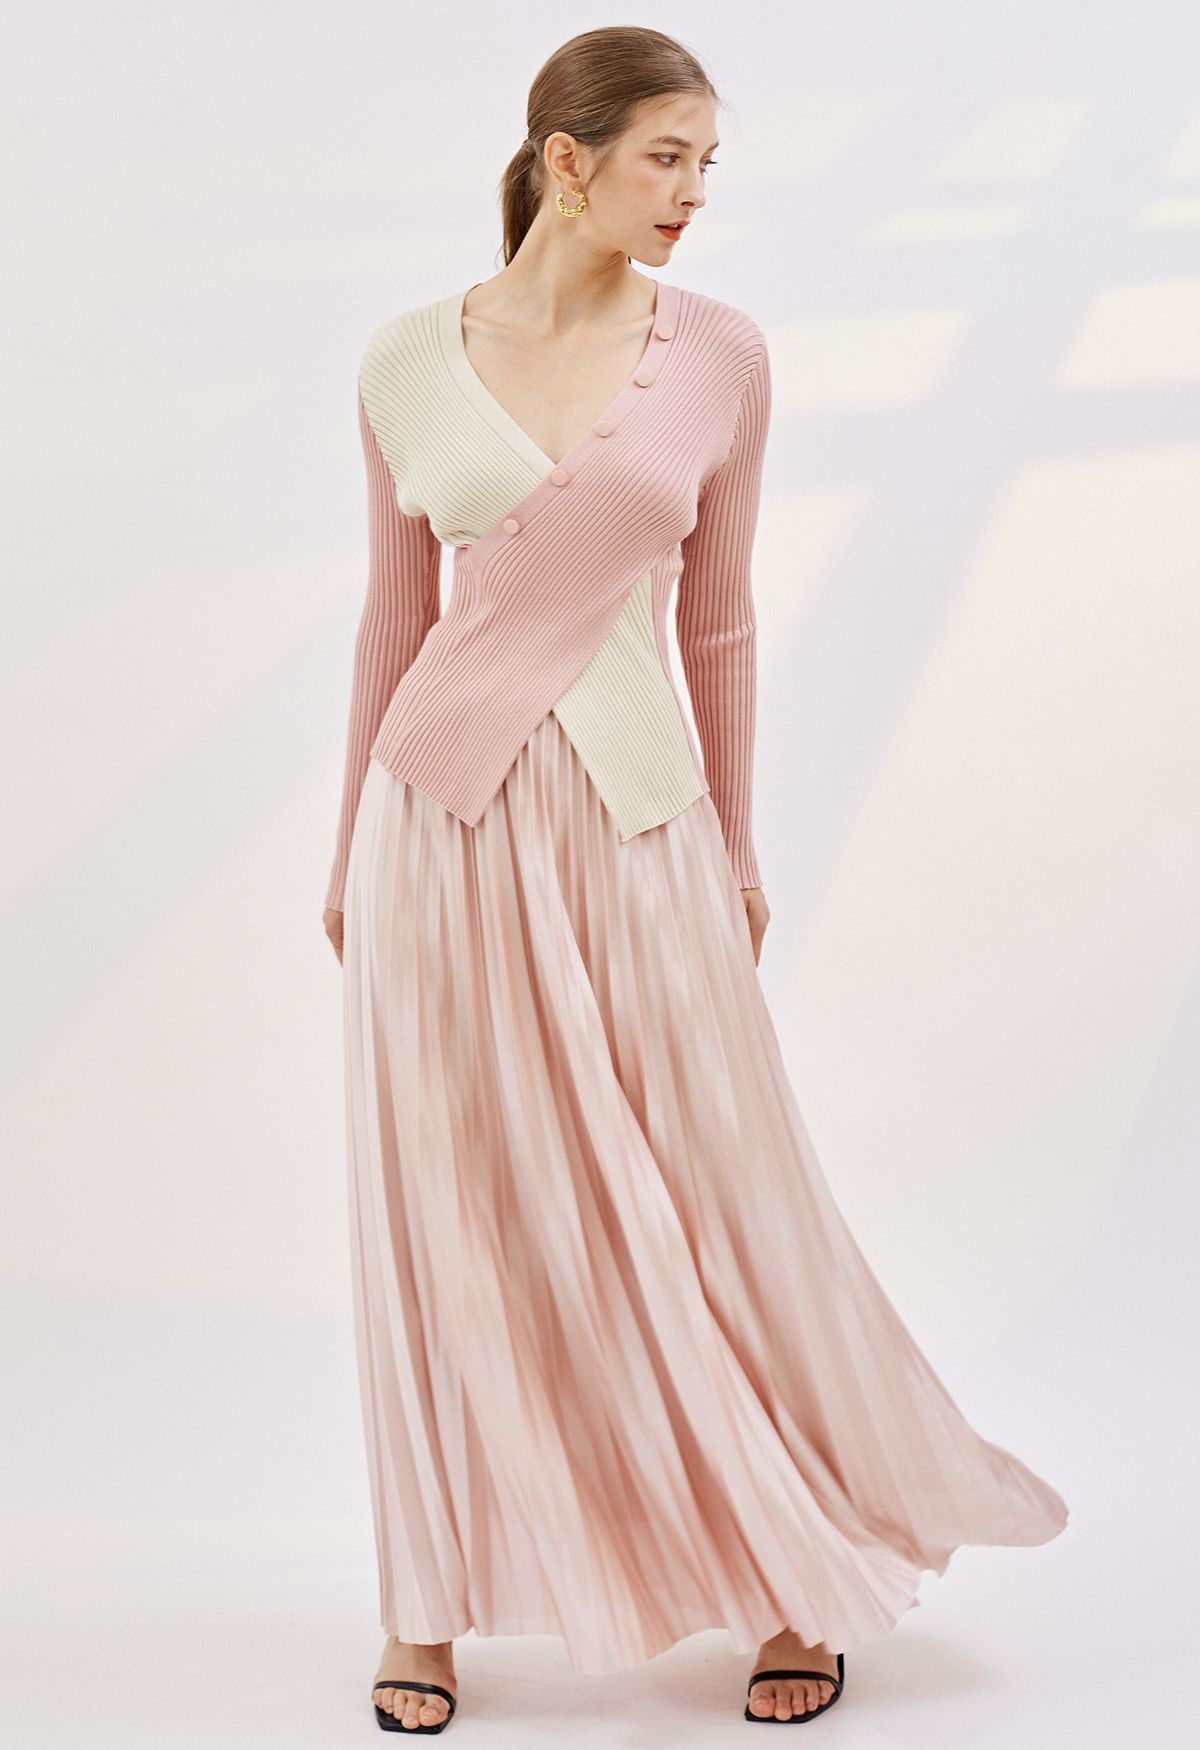 Glossy Pleated Maxi Skirt in Nude Pink